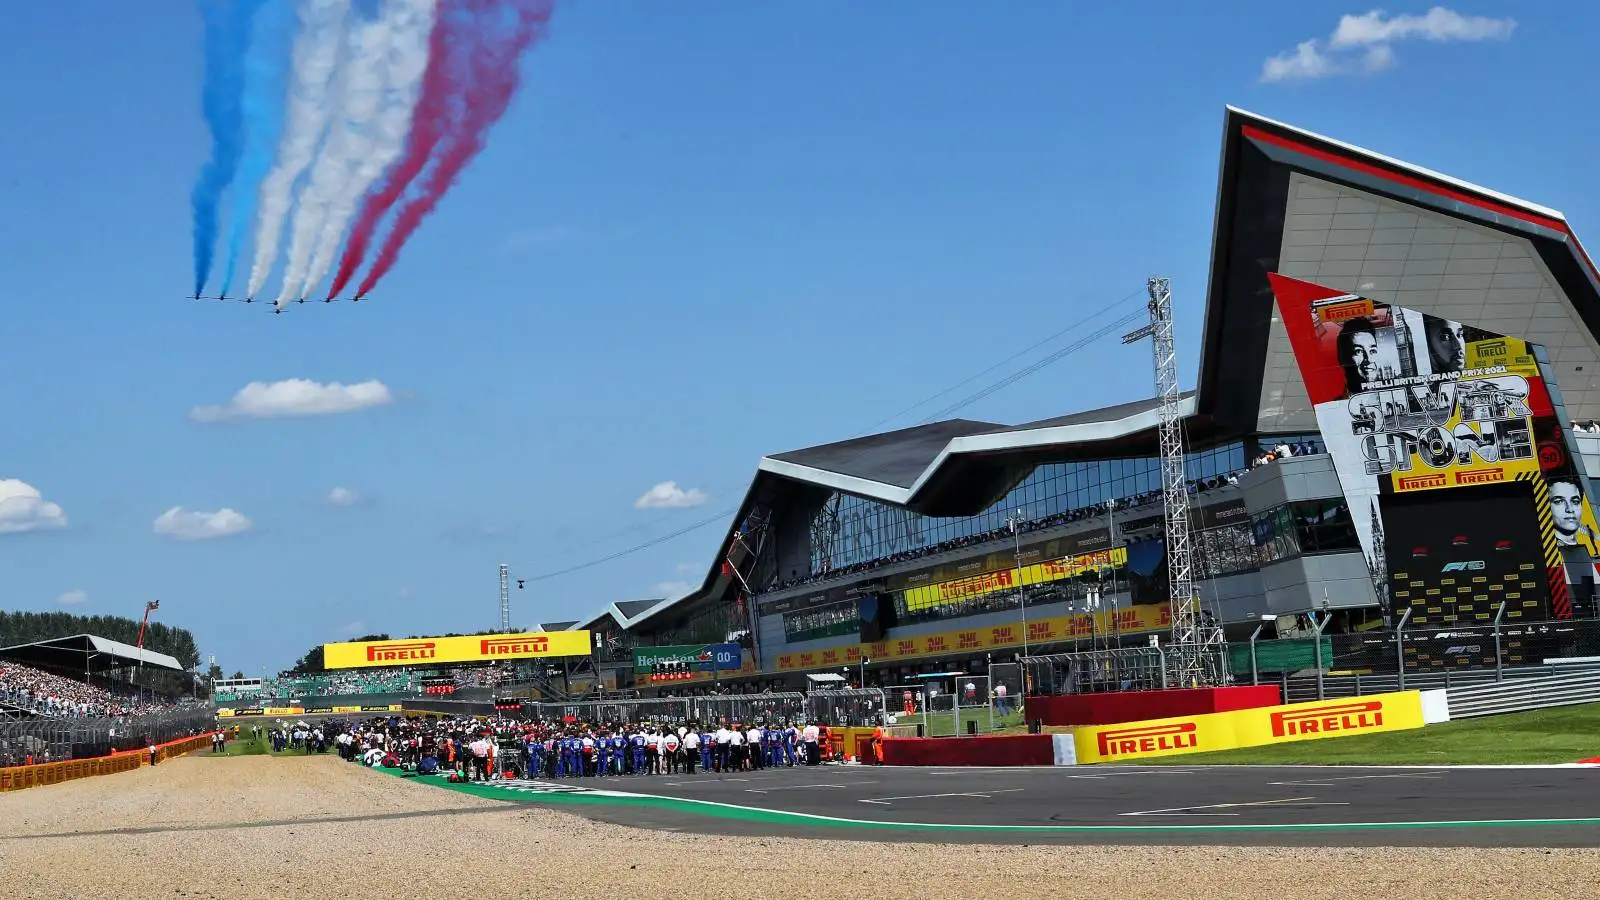 The Red Arrows pass Silverstone. England, July 2021.